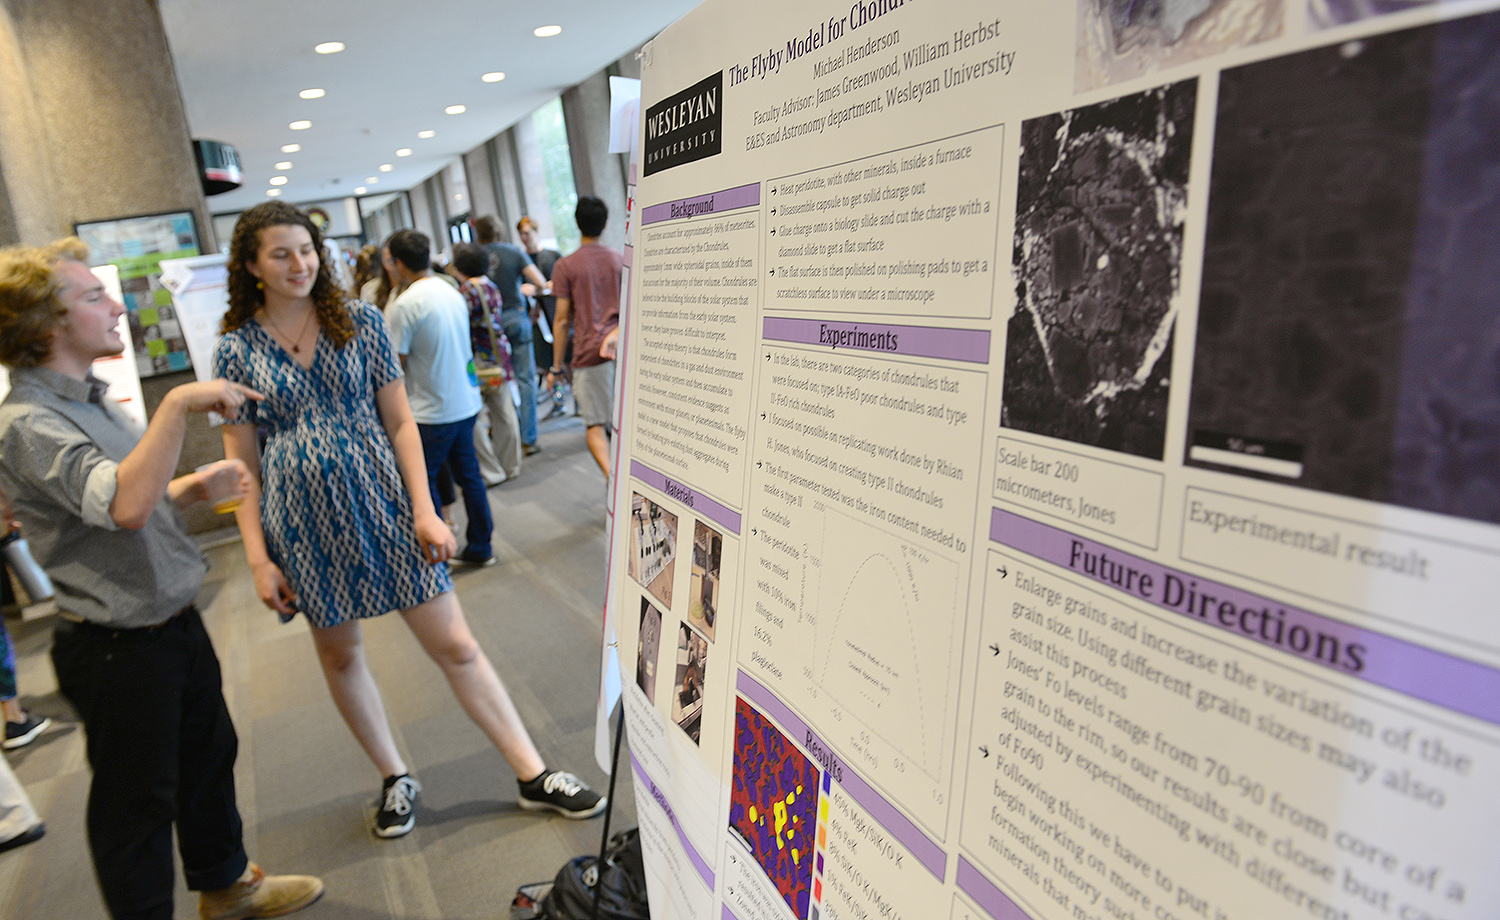 Research poster presentations were made by students studying astronomy, biology, chemistry, earth and environmental sciences, math and computer sciences, molecular biology and biochemistry, physics, psychology and quantitative analysis.